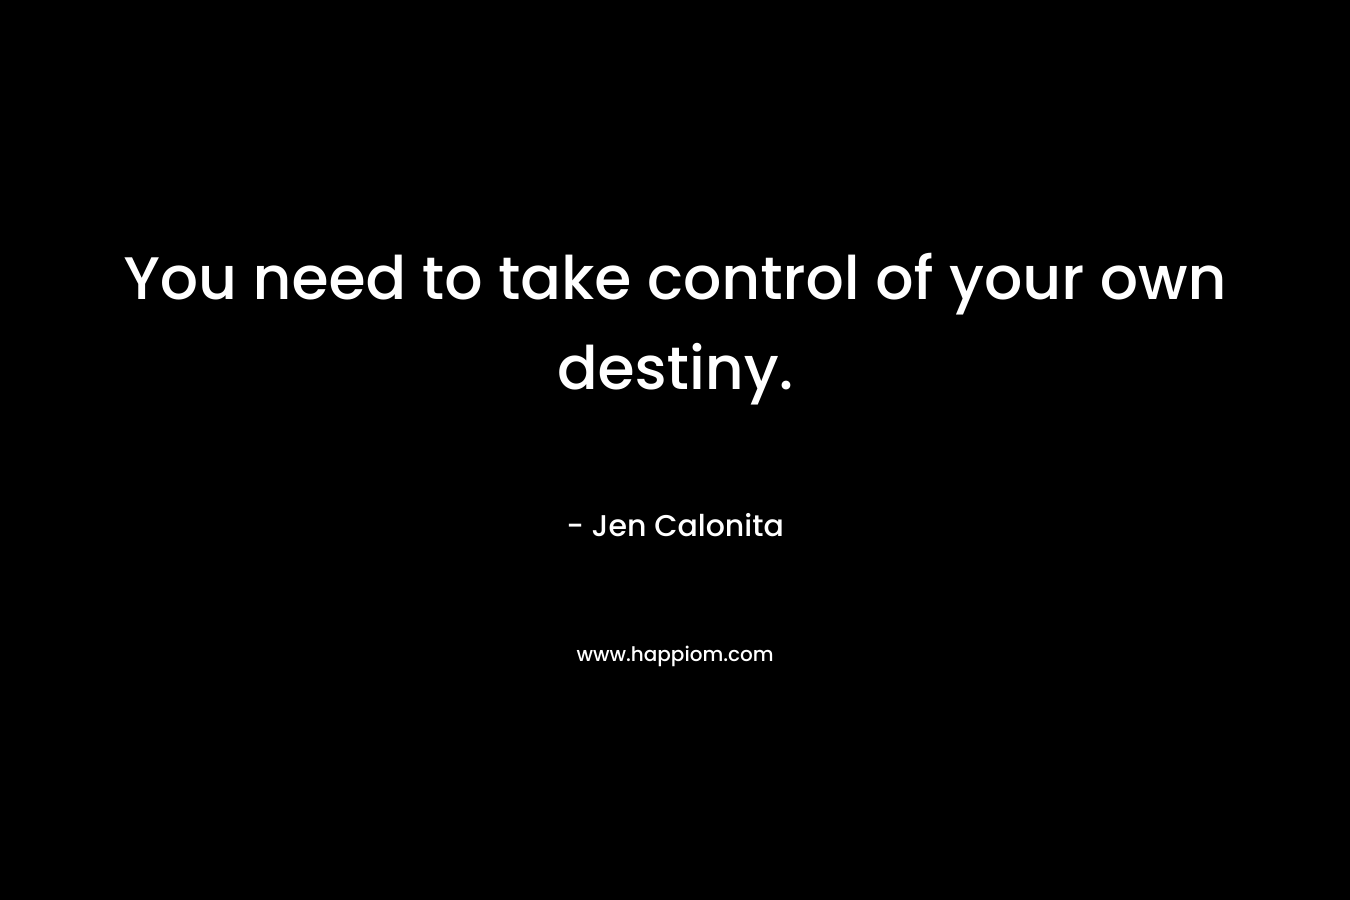 You need to take control of your own destiny.